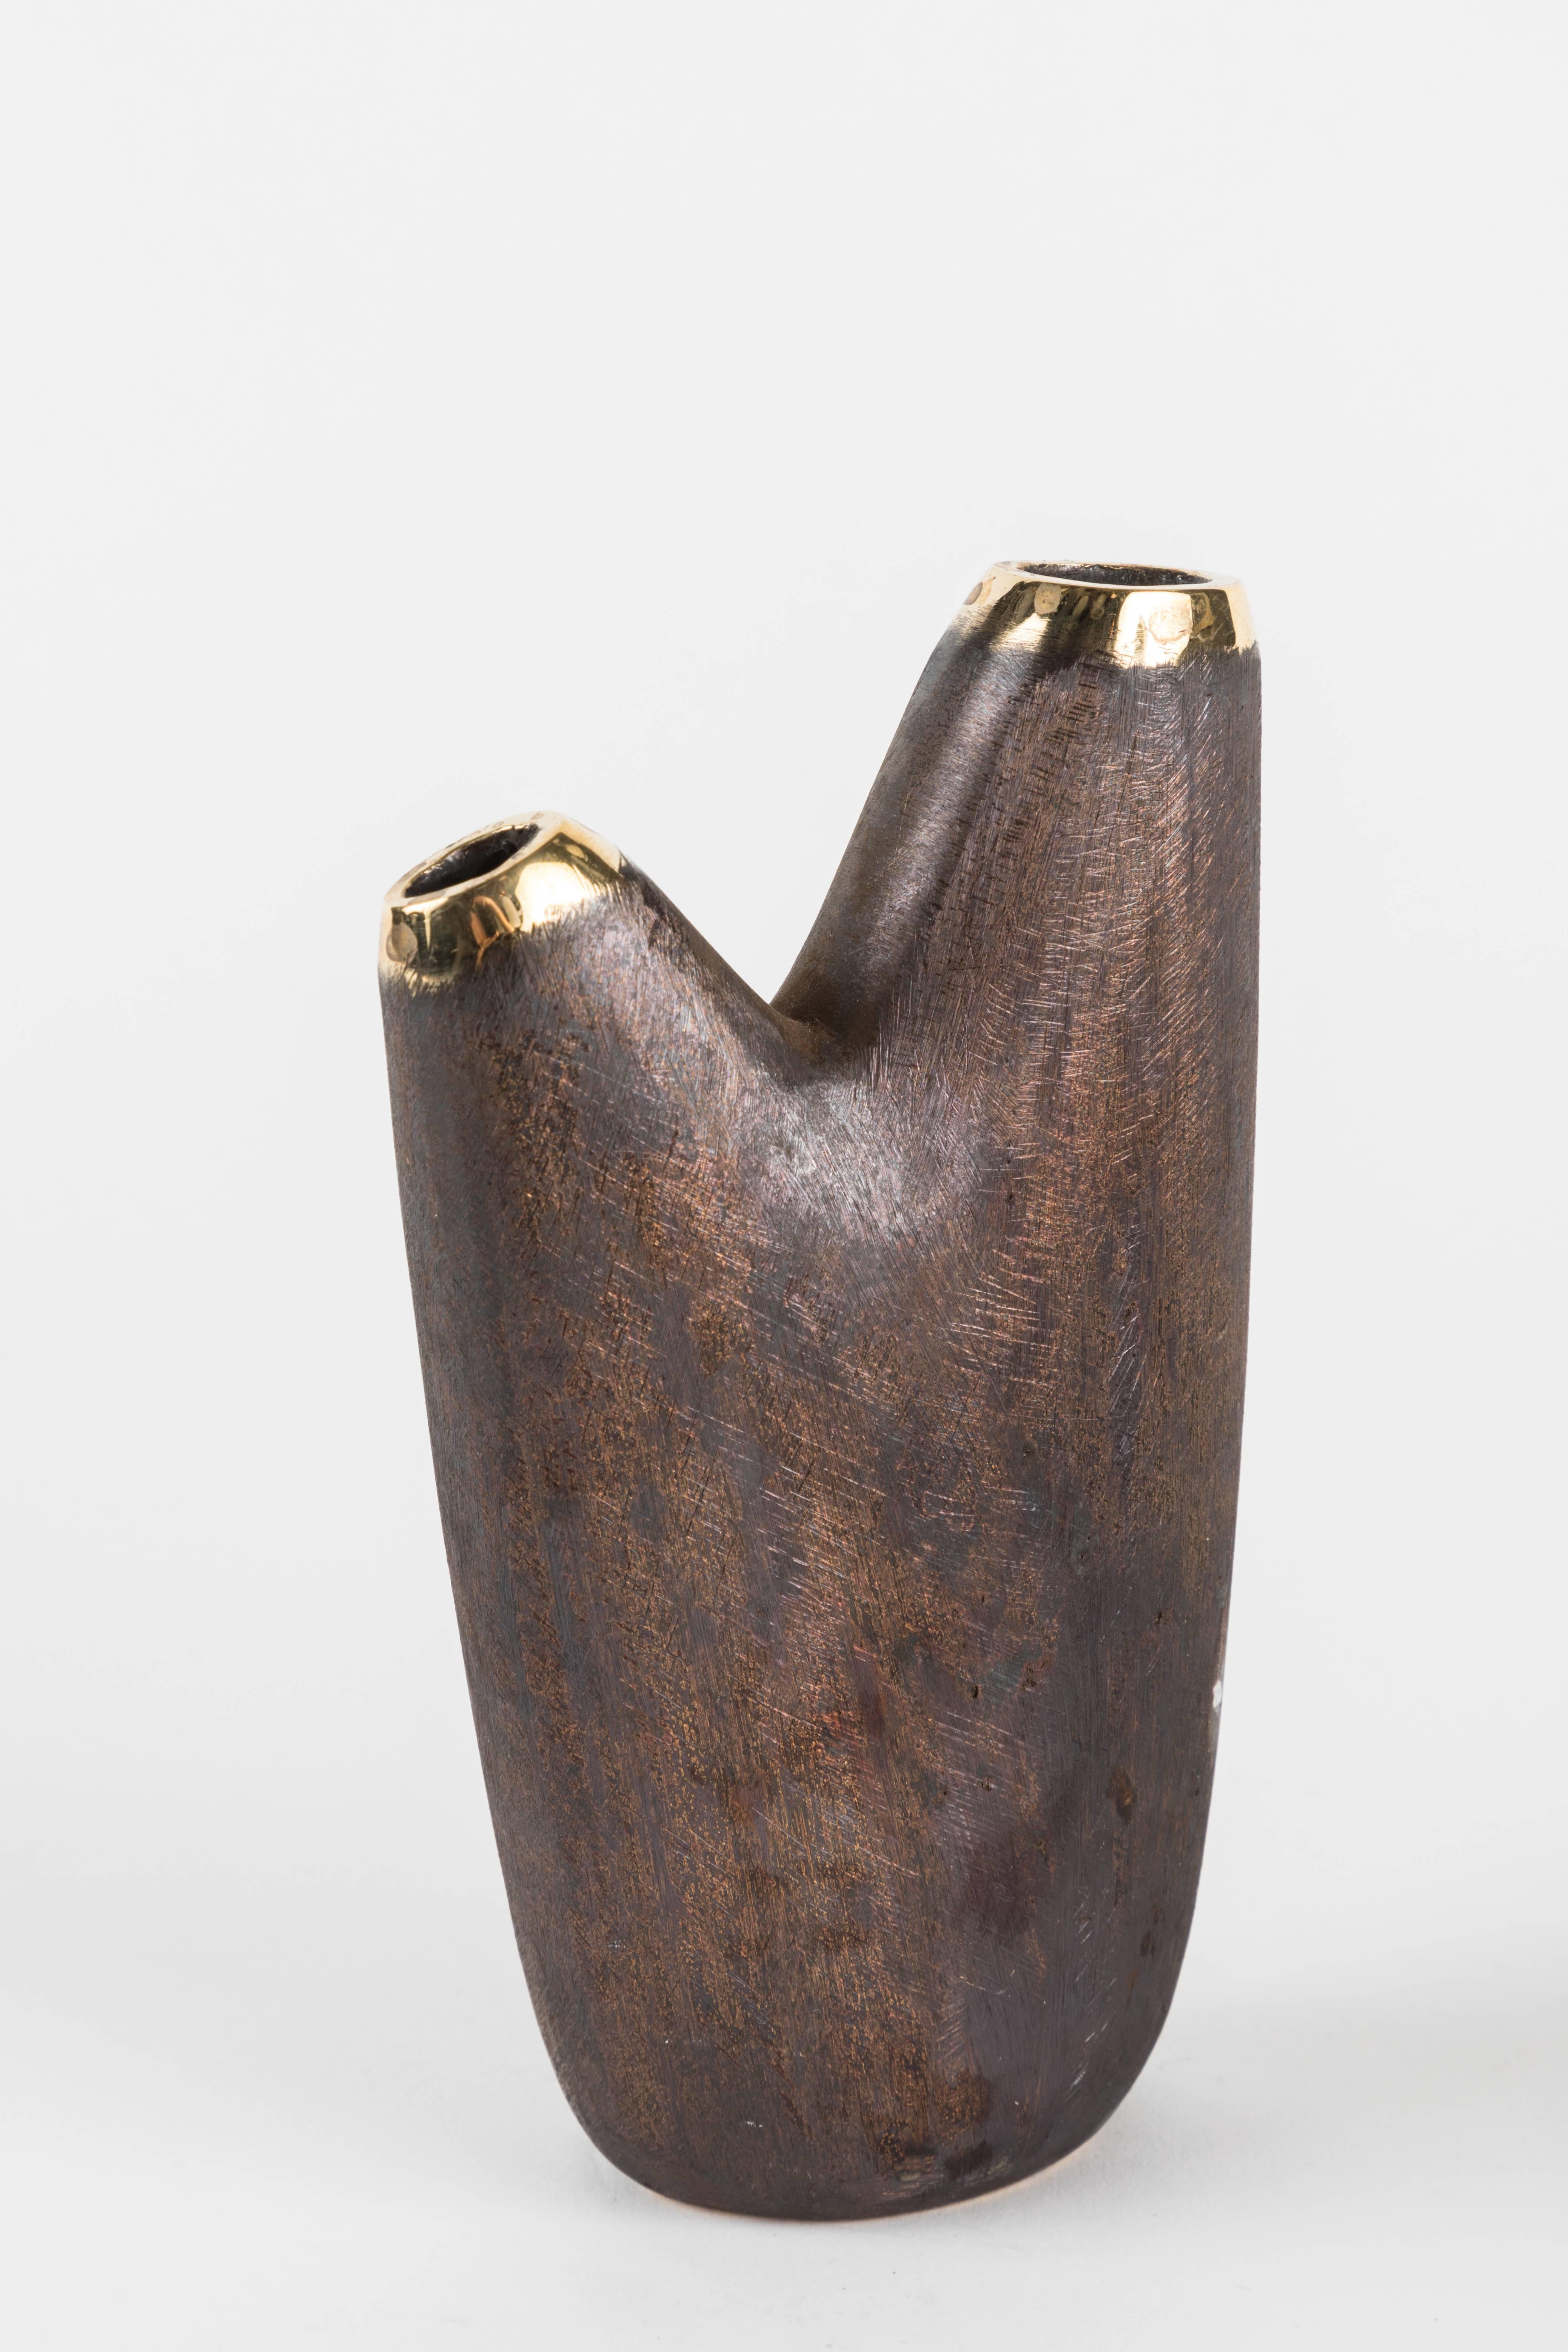 Carl Aubo¨ck Model #3794 'Aorta' brass vase. Designed in the 1950s, this incredibly refined and sculptural Viennese vase is executed in polished and darkly patinated brass by Werkstätte Carl Auböck, Austria. 

Price is per item. Other Aubock vase